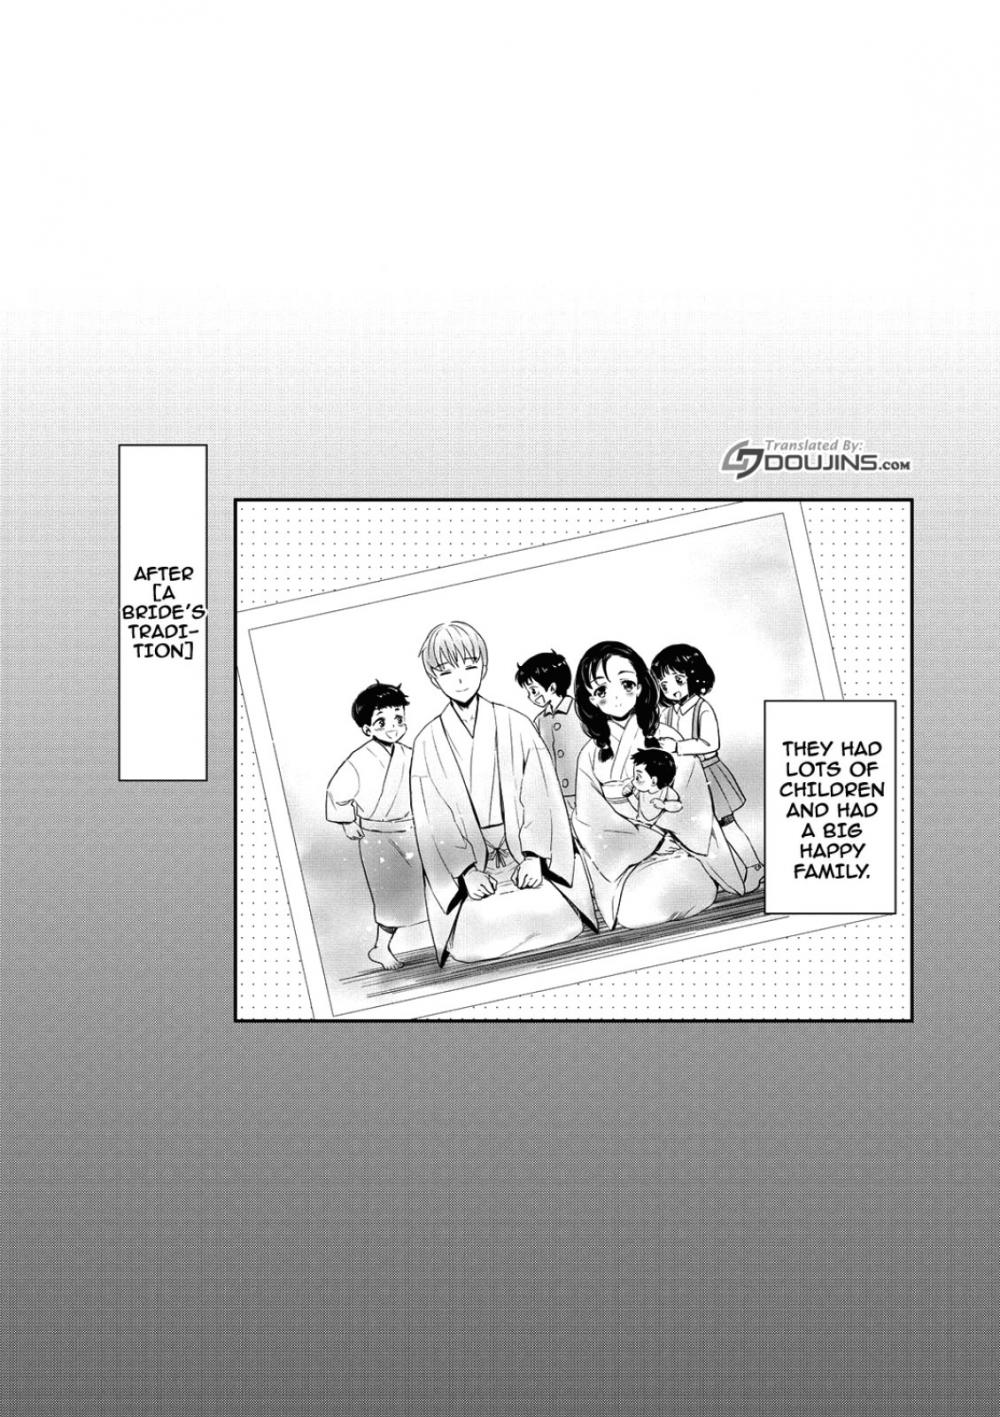 Hentai Manga Comic-From Now On She'll Be Doing NTR-Chapter 10-2